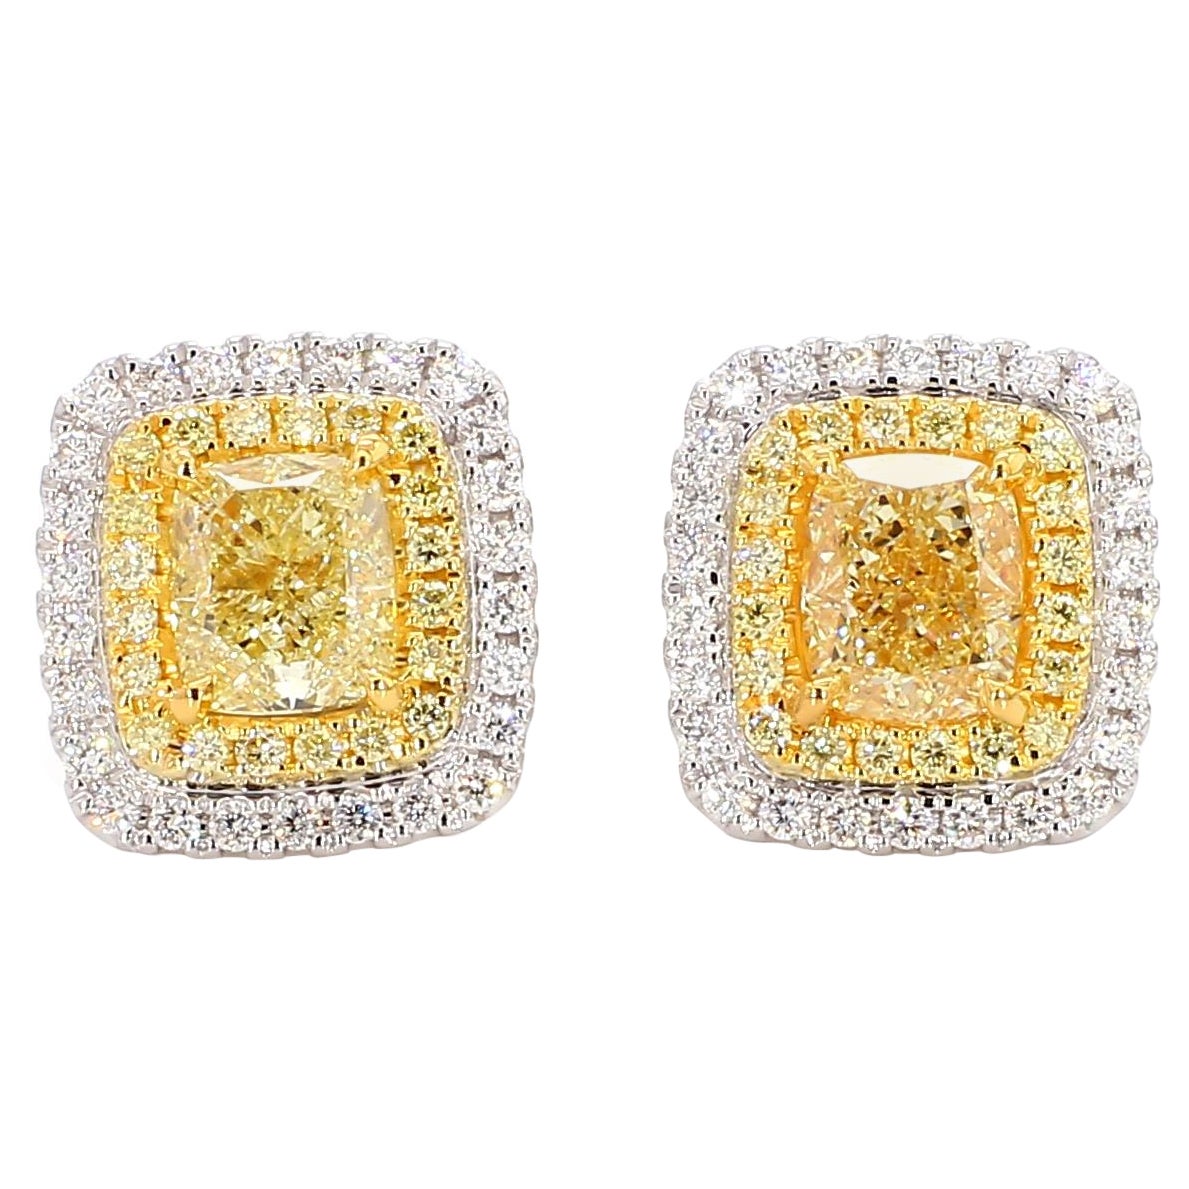 GIA Certified Natural Yellow Cushion Diamond 3.02 Carat TW Gold Stud Earrings For Sale